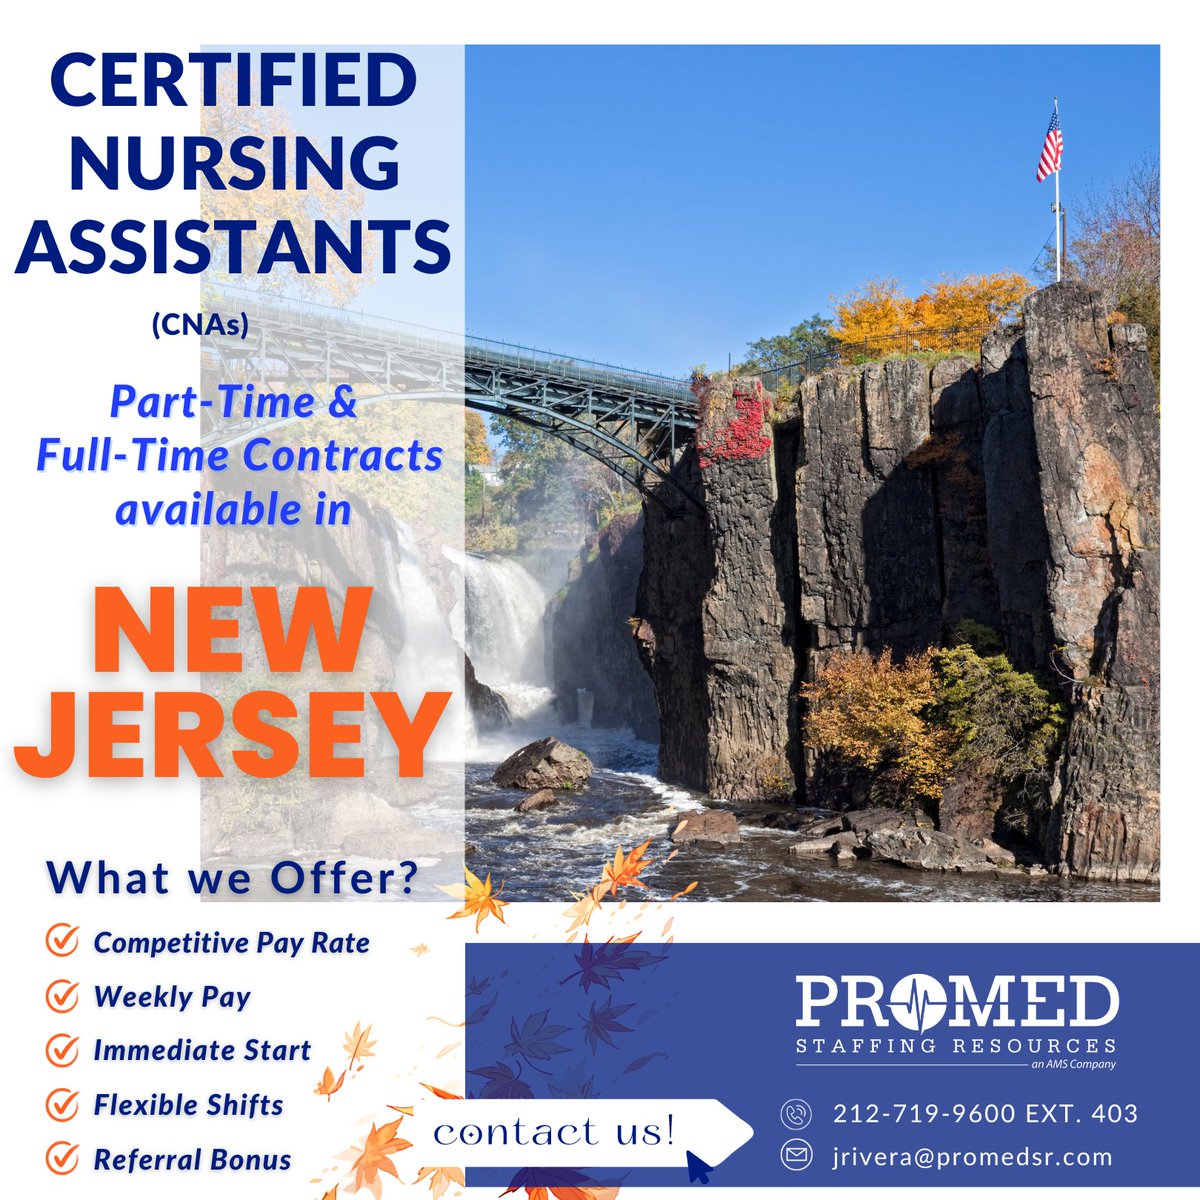 Discover the beauty of #NewJersey, known as the garden state, with ProMed Staffing Resources. Reach out to Jorell Rivera at (212) 719-9600 or send your resume to jrivera@promedsr.com to start today

#certifiednursingassisstant #cnainnewjersey #cnajobs #promed #promedsr